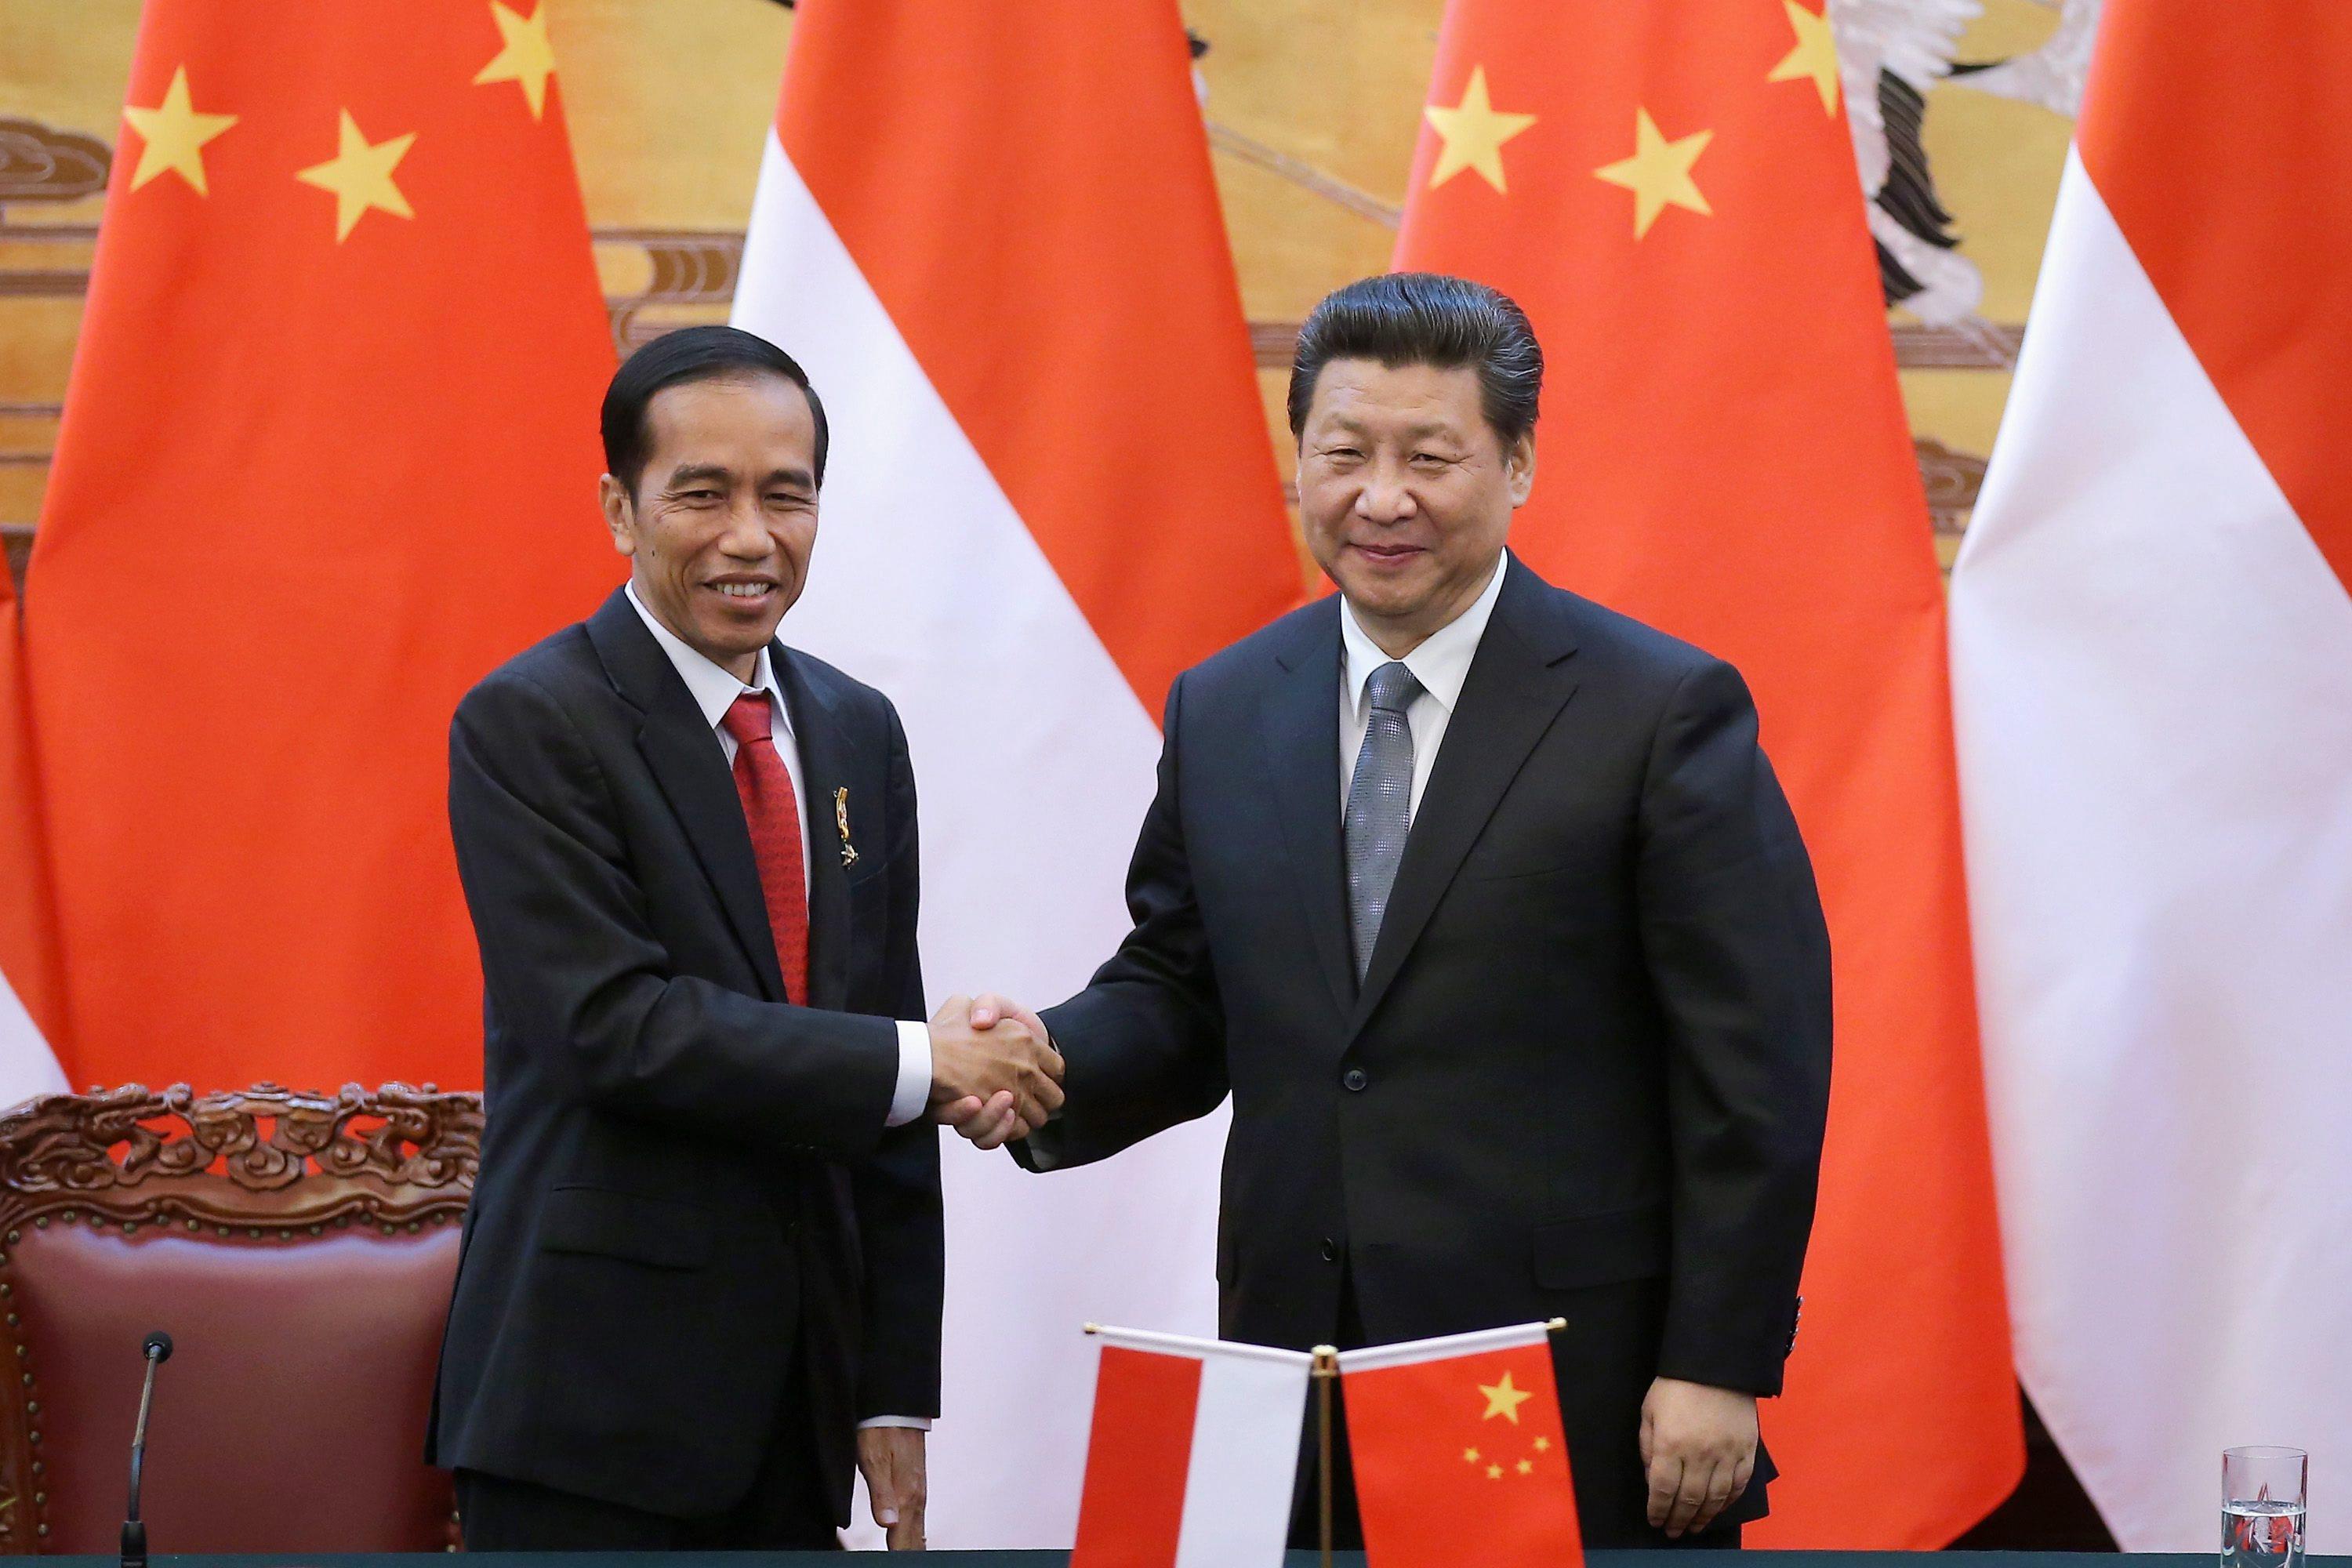 Indonesia’s Joko Widodo plans to invite Xi Jinping to travel on the China-built Jakarta-Bandung high-speed railway after taking part in the Bali G20 summit on November 15-16. Photo: EPA/Pool/File